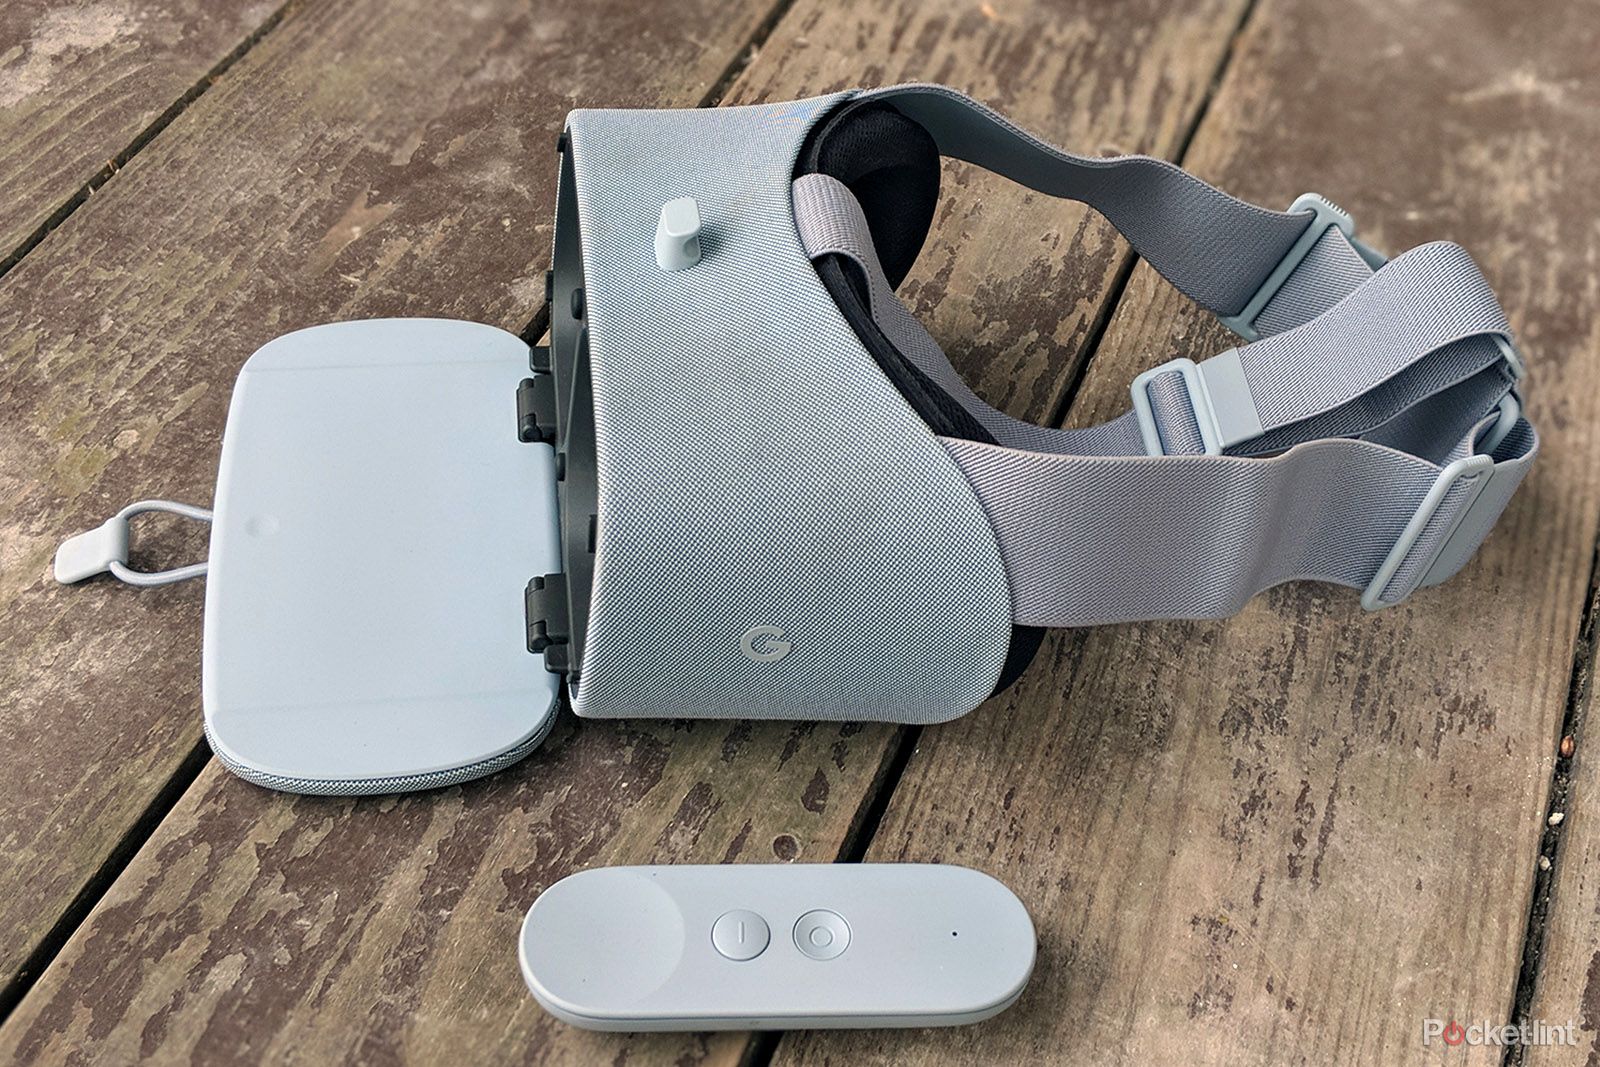 Google Daydream View 2017 review image 1